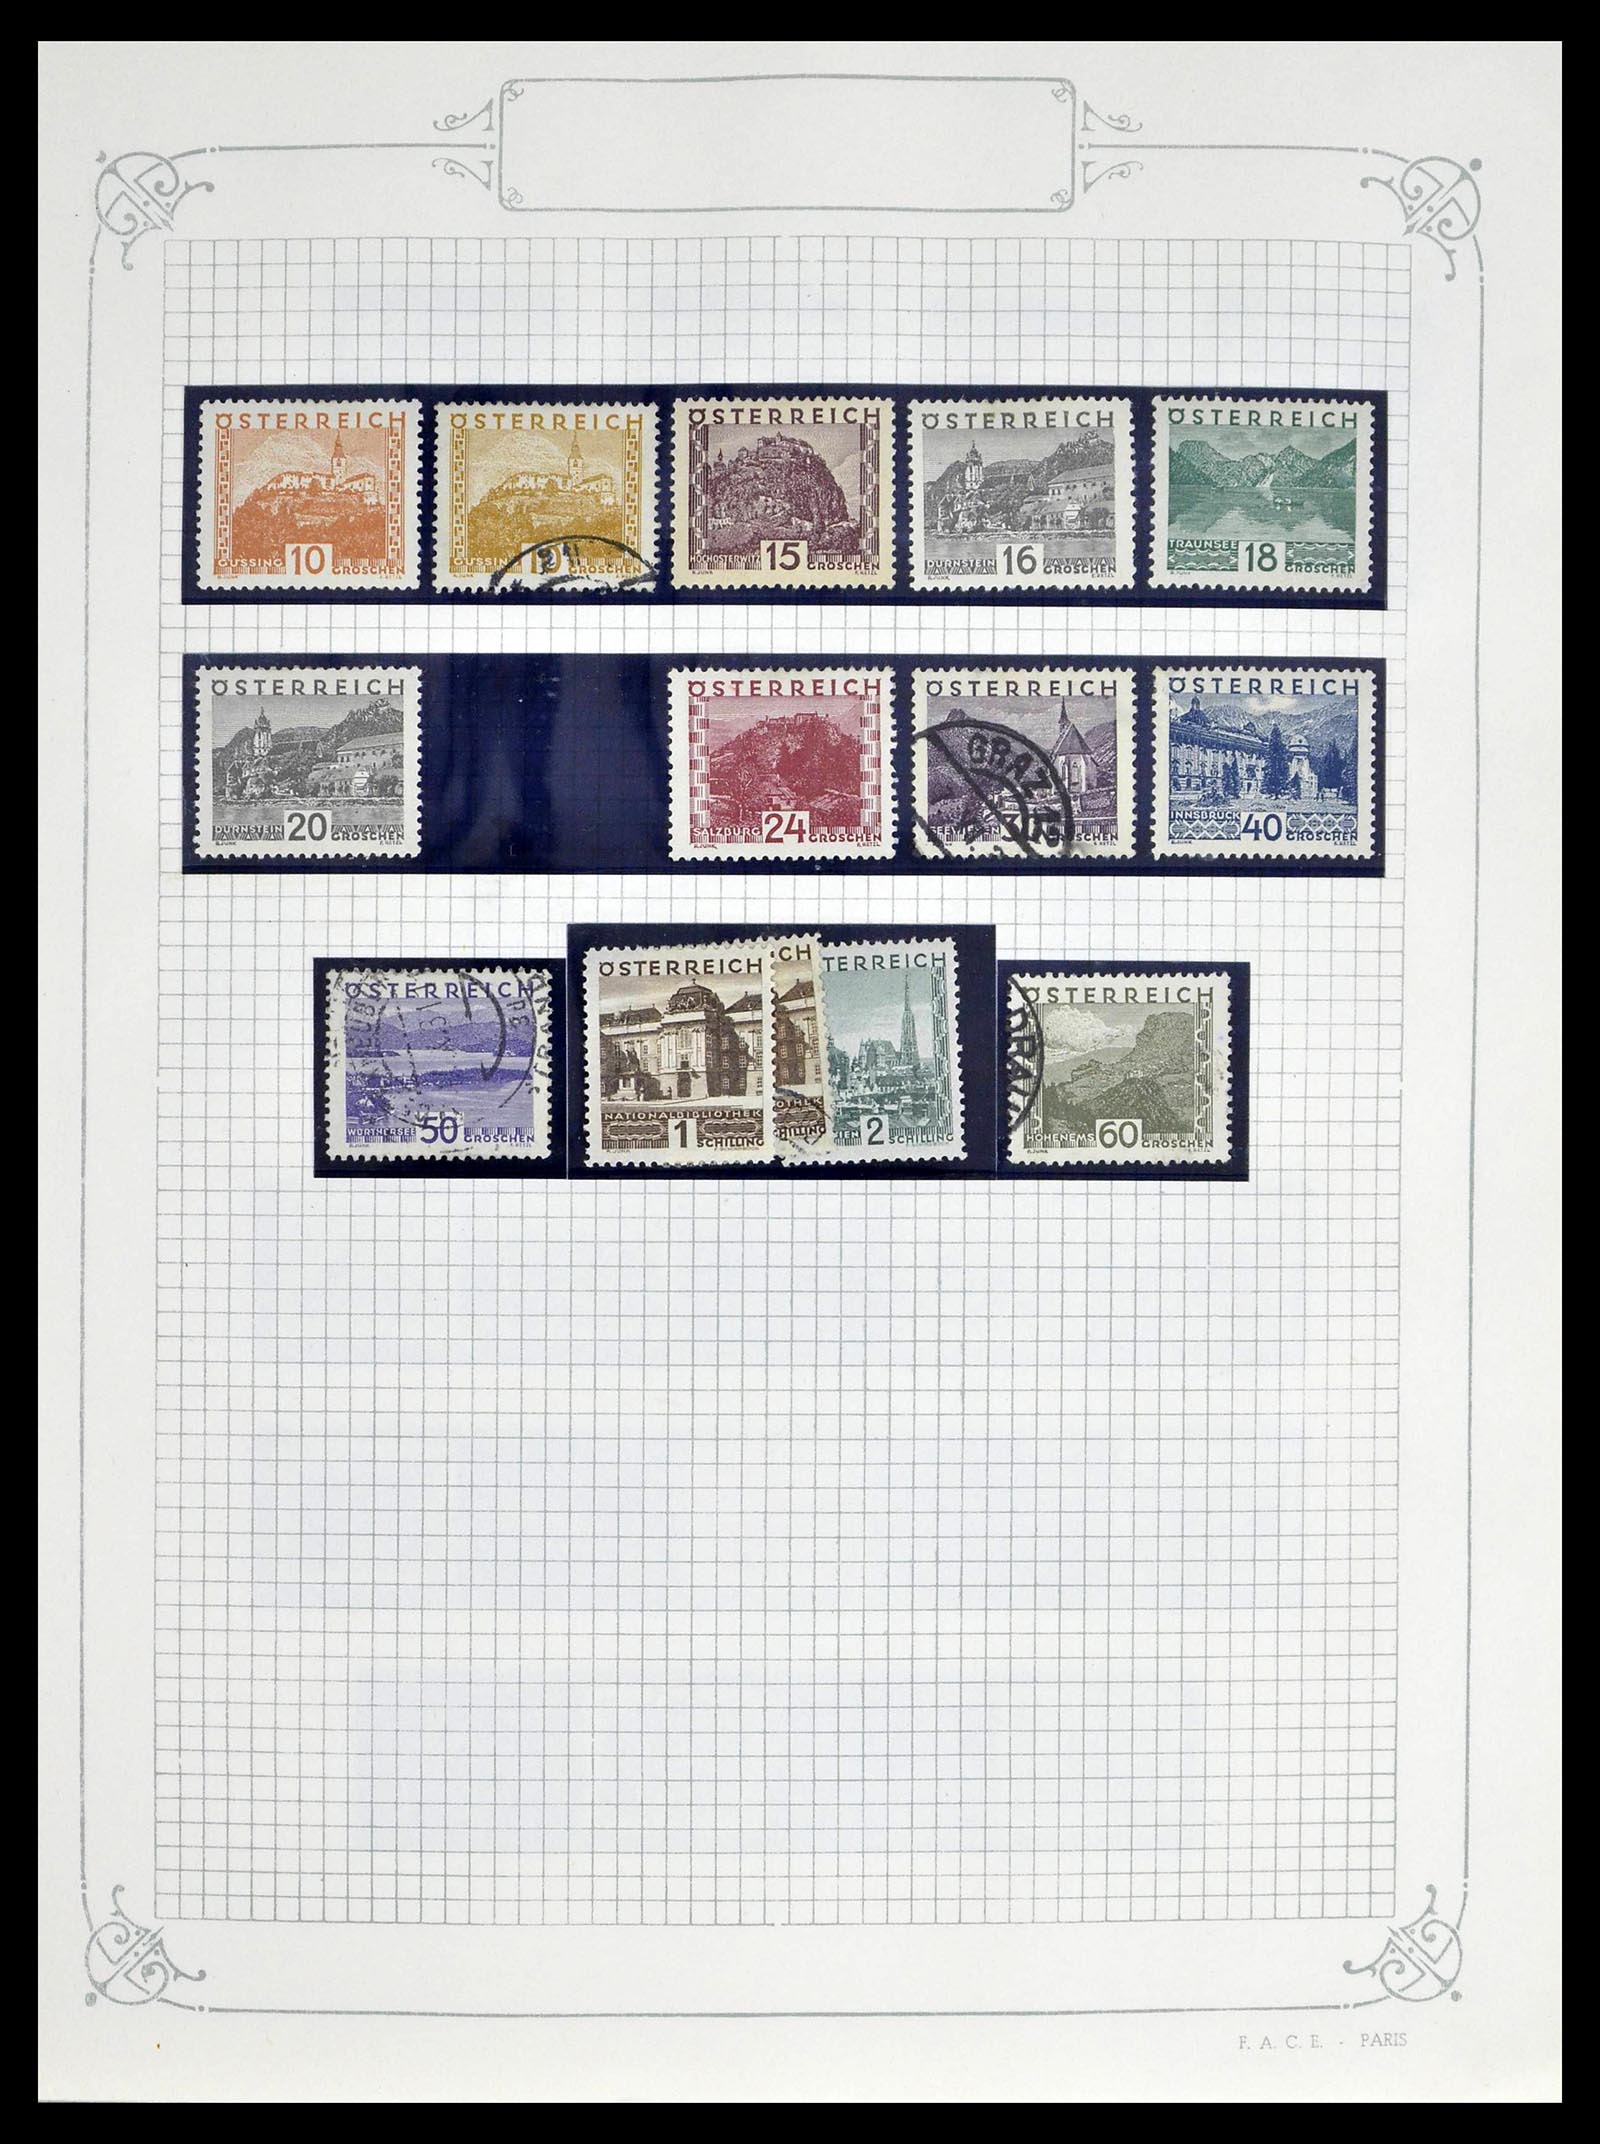 39276 0025 - Stamp collection 39276 Austria and territories 1850-1979.